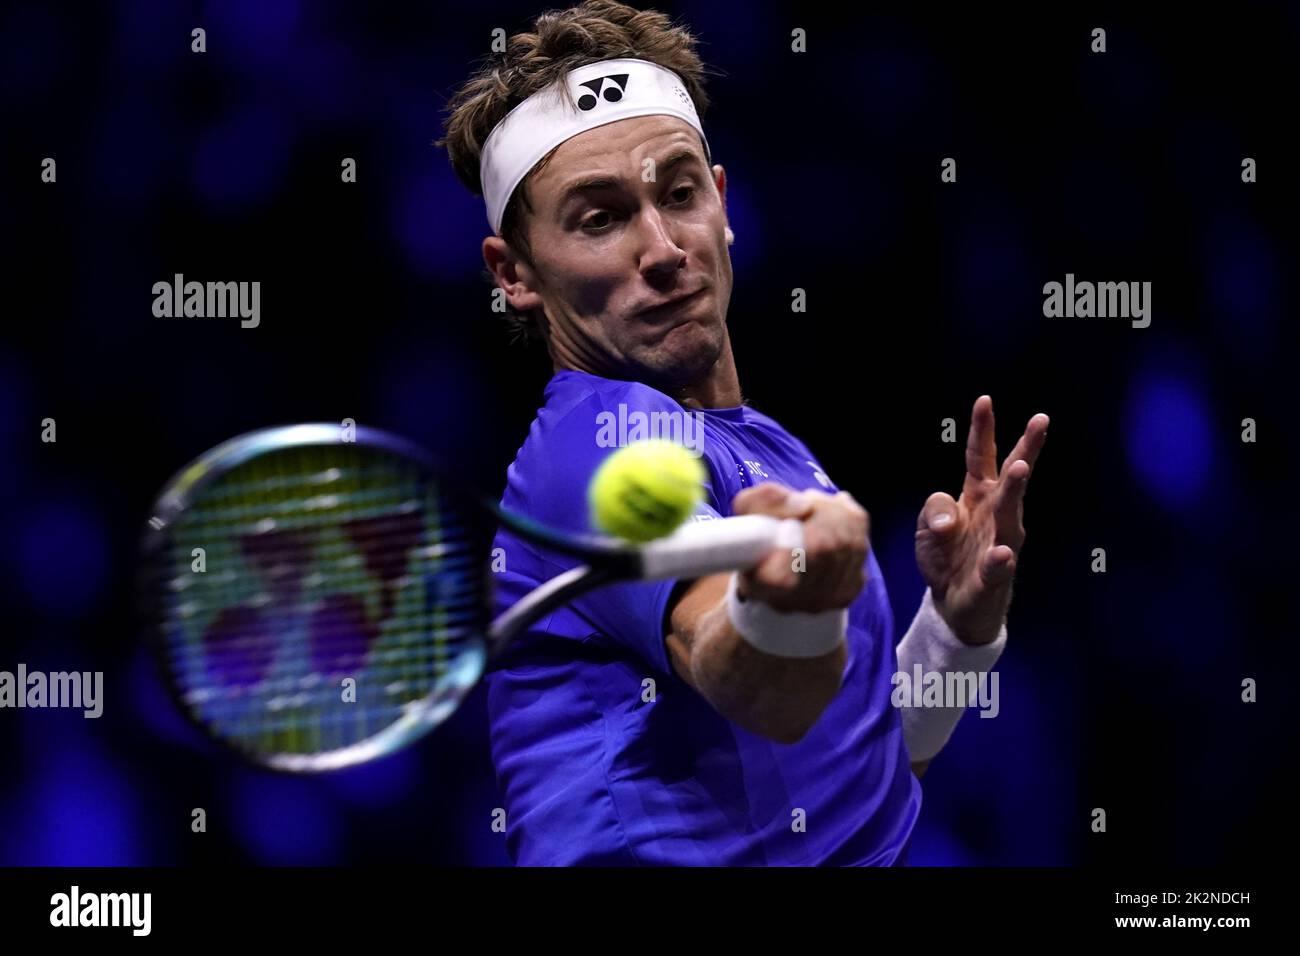 Team Europe's Casper Ruud in action against Team World's Jack Sock (not pictured) on day one of the Laver Cup at the O2 Arena, London. Picture date: Friday September 23, 2022. Stock Photo